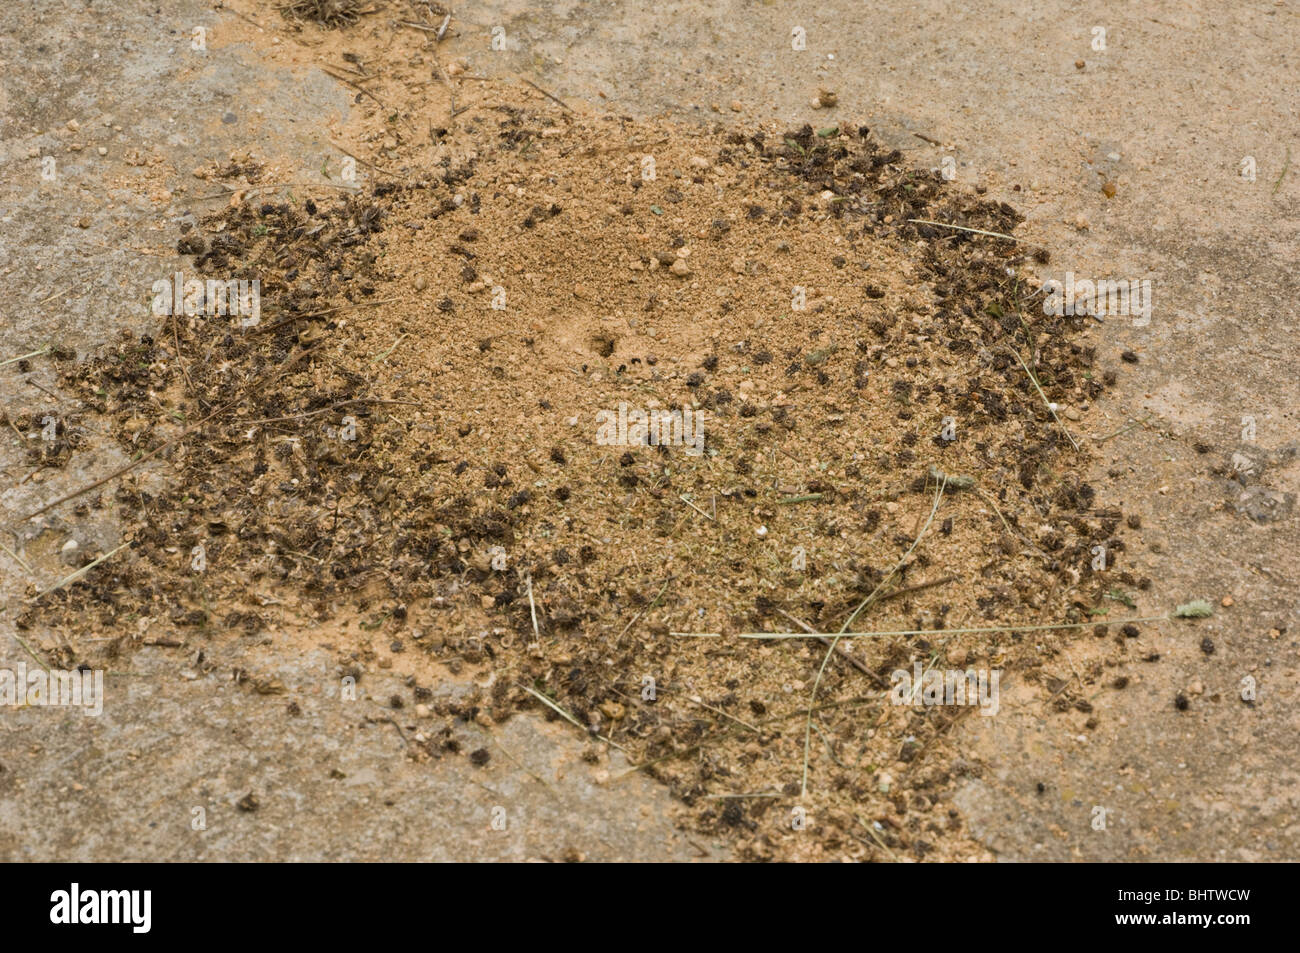 Anthill of Messor barbarus, the harvesting ant Stock Photo